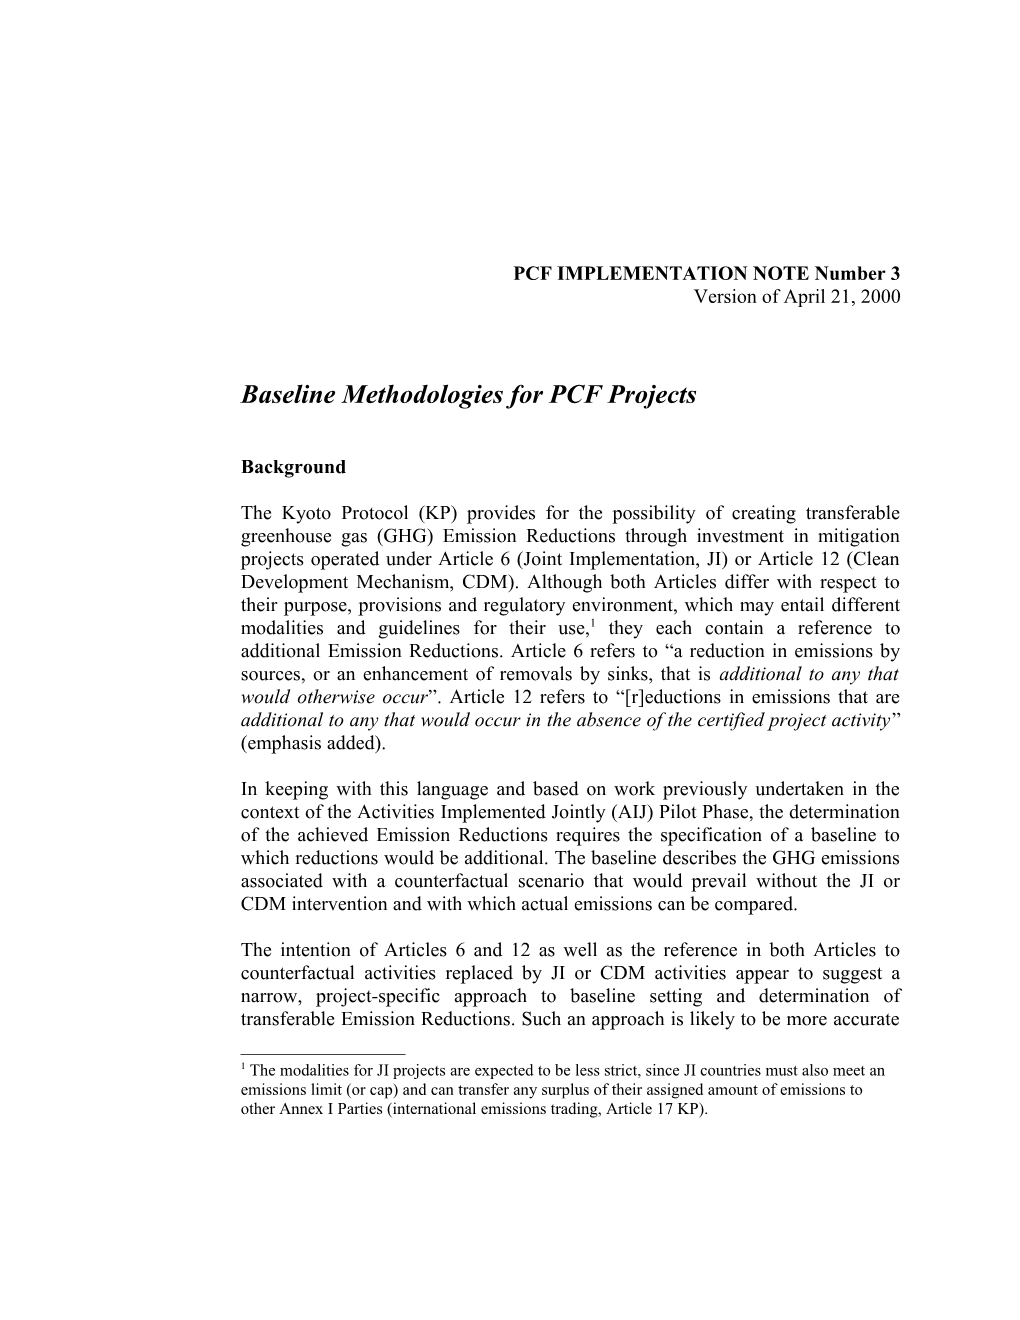 Baseline Methodologies for Pcf Projects